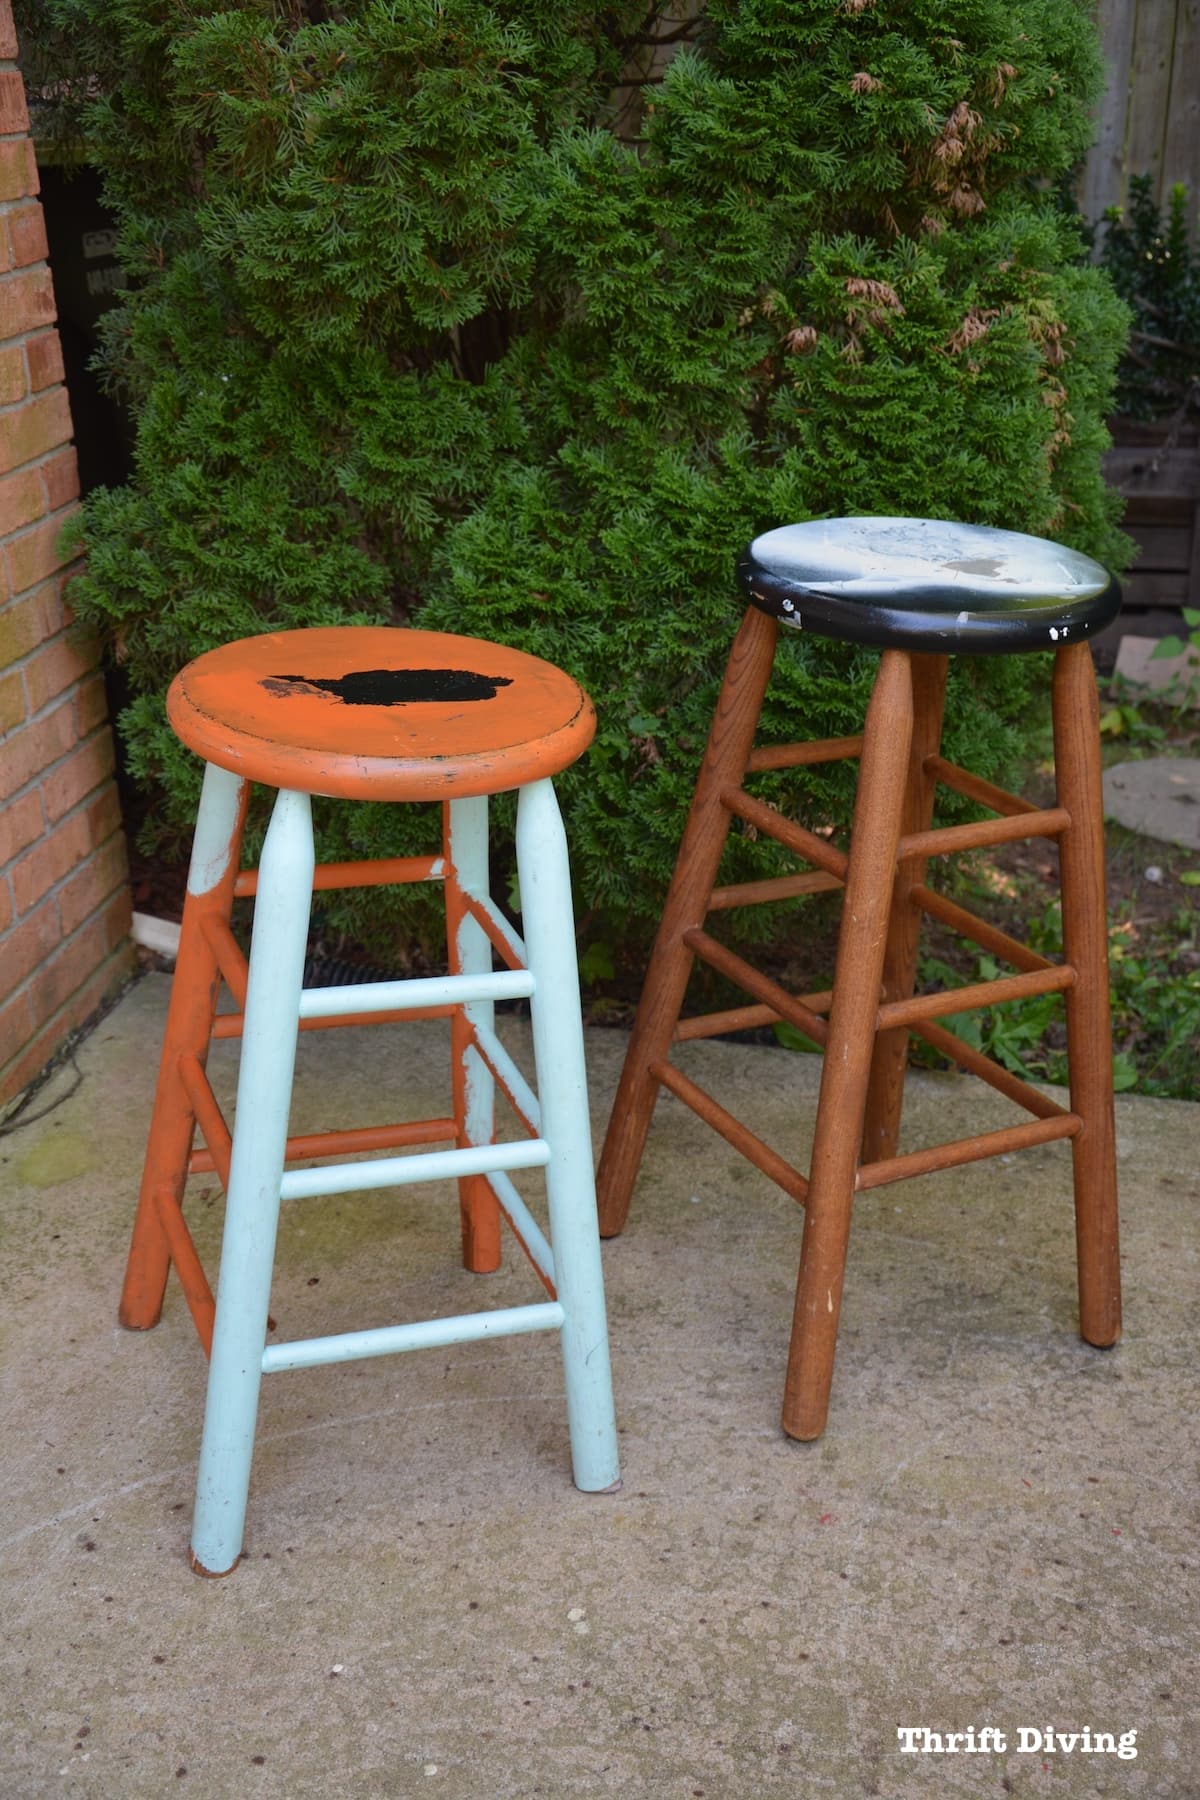 BEFORE & AFTER: Ugly old stools can be painted and you can shorten barstools to fit under a shorter eat-in kitchen table. | Thrift Diving Blog